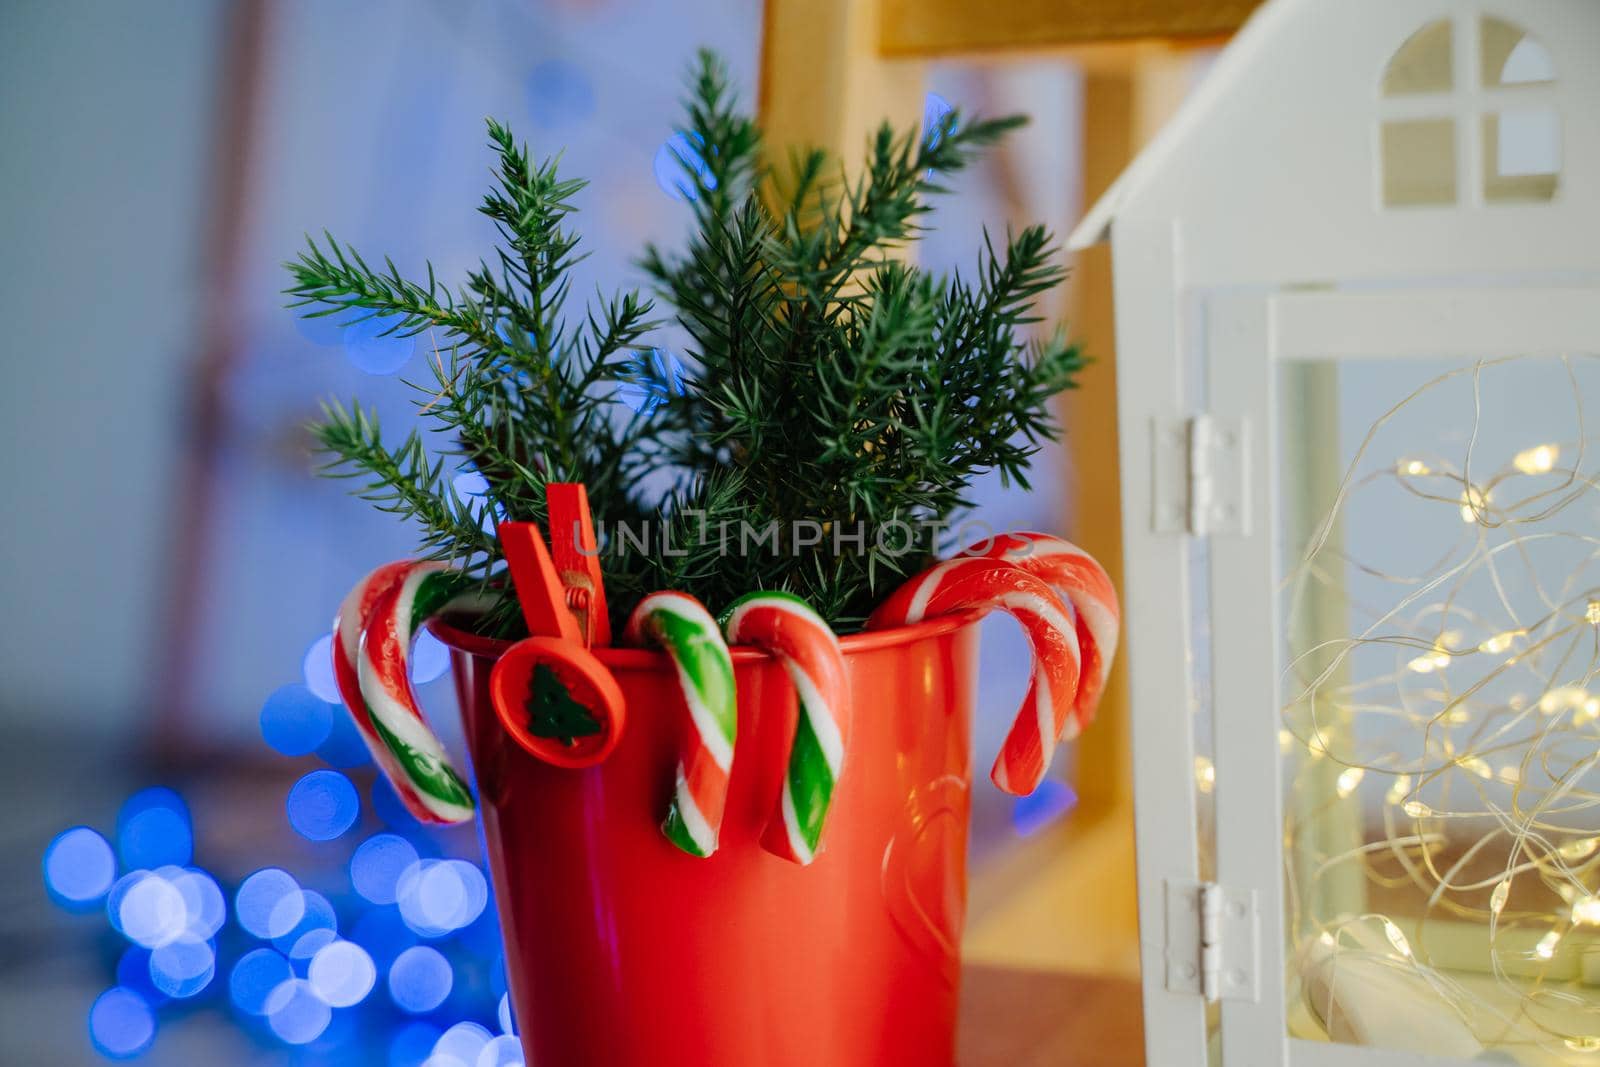 Composition of red pots with coniferous branches and ledins canes and a white house. Christmas decor. by Rodnova